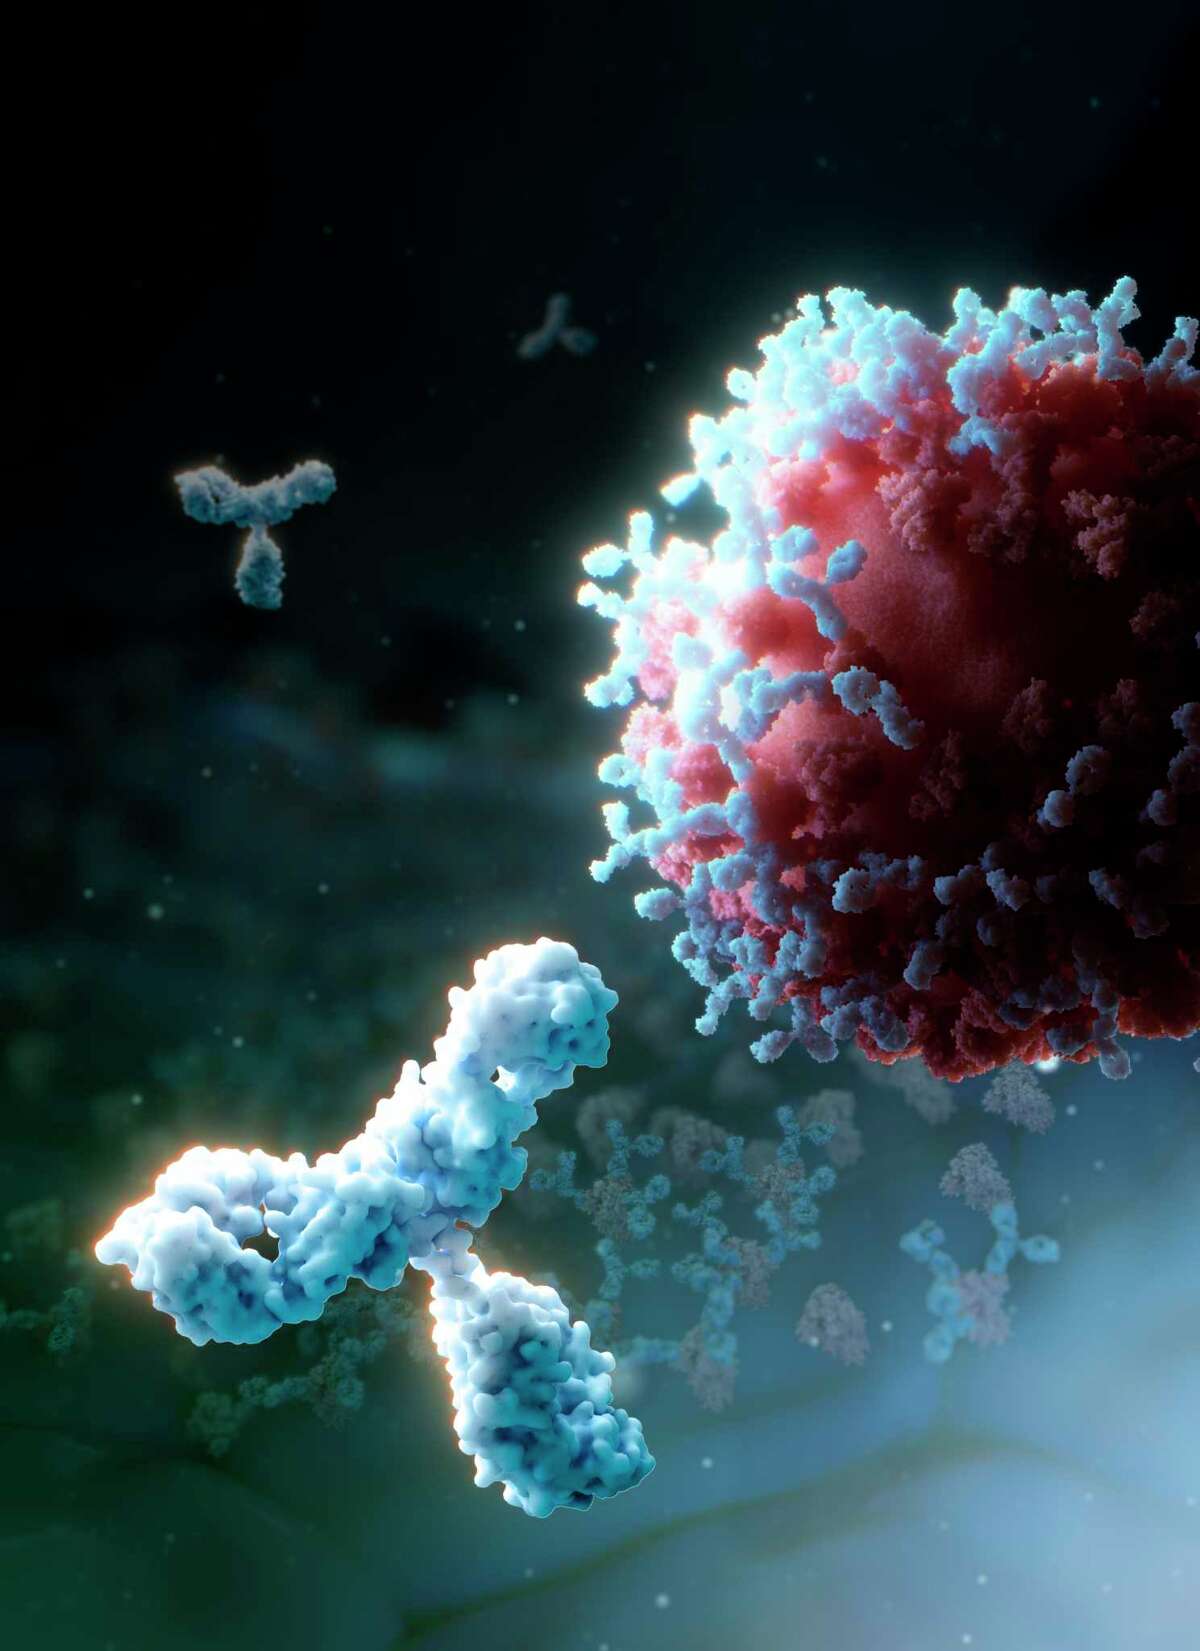 A rendering showing the human neutralizing antibody S309 (blue) latching on the spike glycoprotein of SARS-CoV-2 (red), which is the virus responsible for the ongoing COVID-19 pandemic. In the background, the S309 antibody is shown recognizing the SARS-CoV-2 spike glycoprotein present at the surface of infected cells and will promote their elimination.